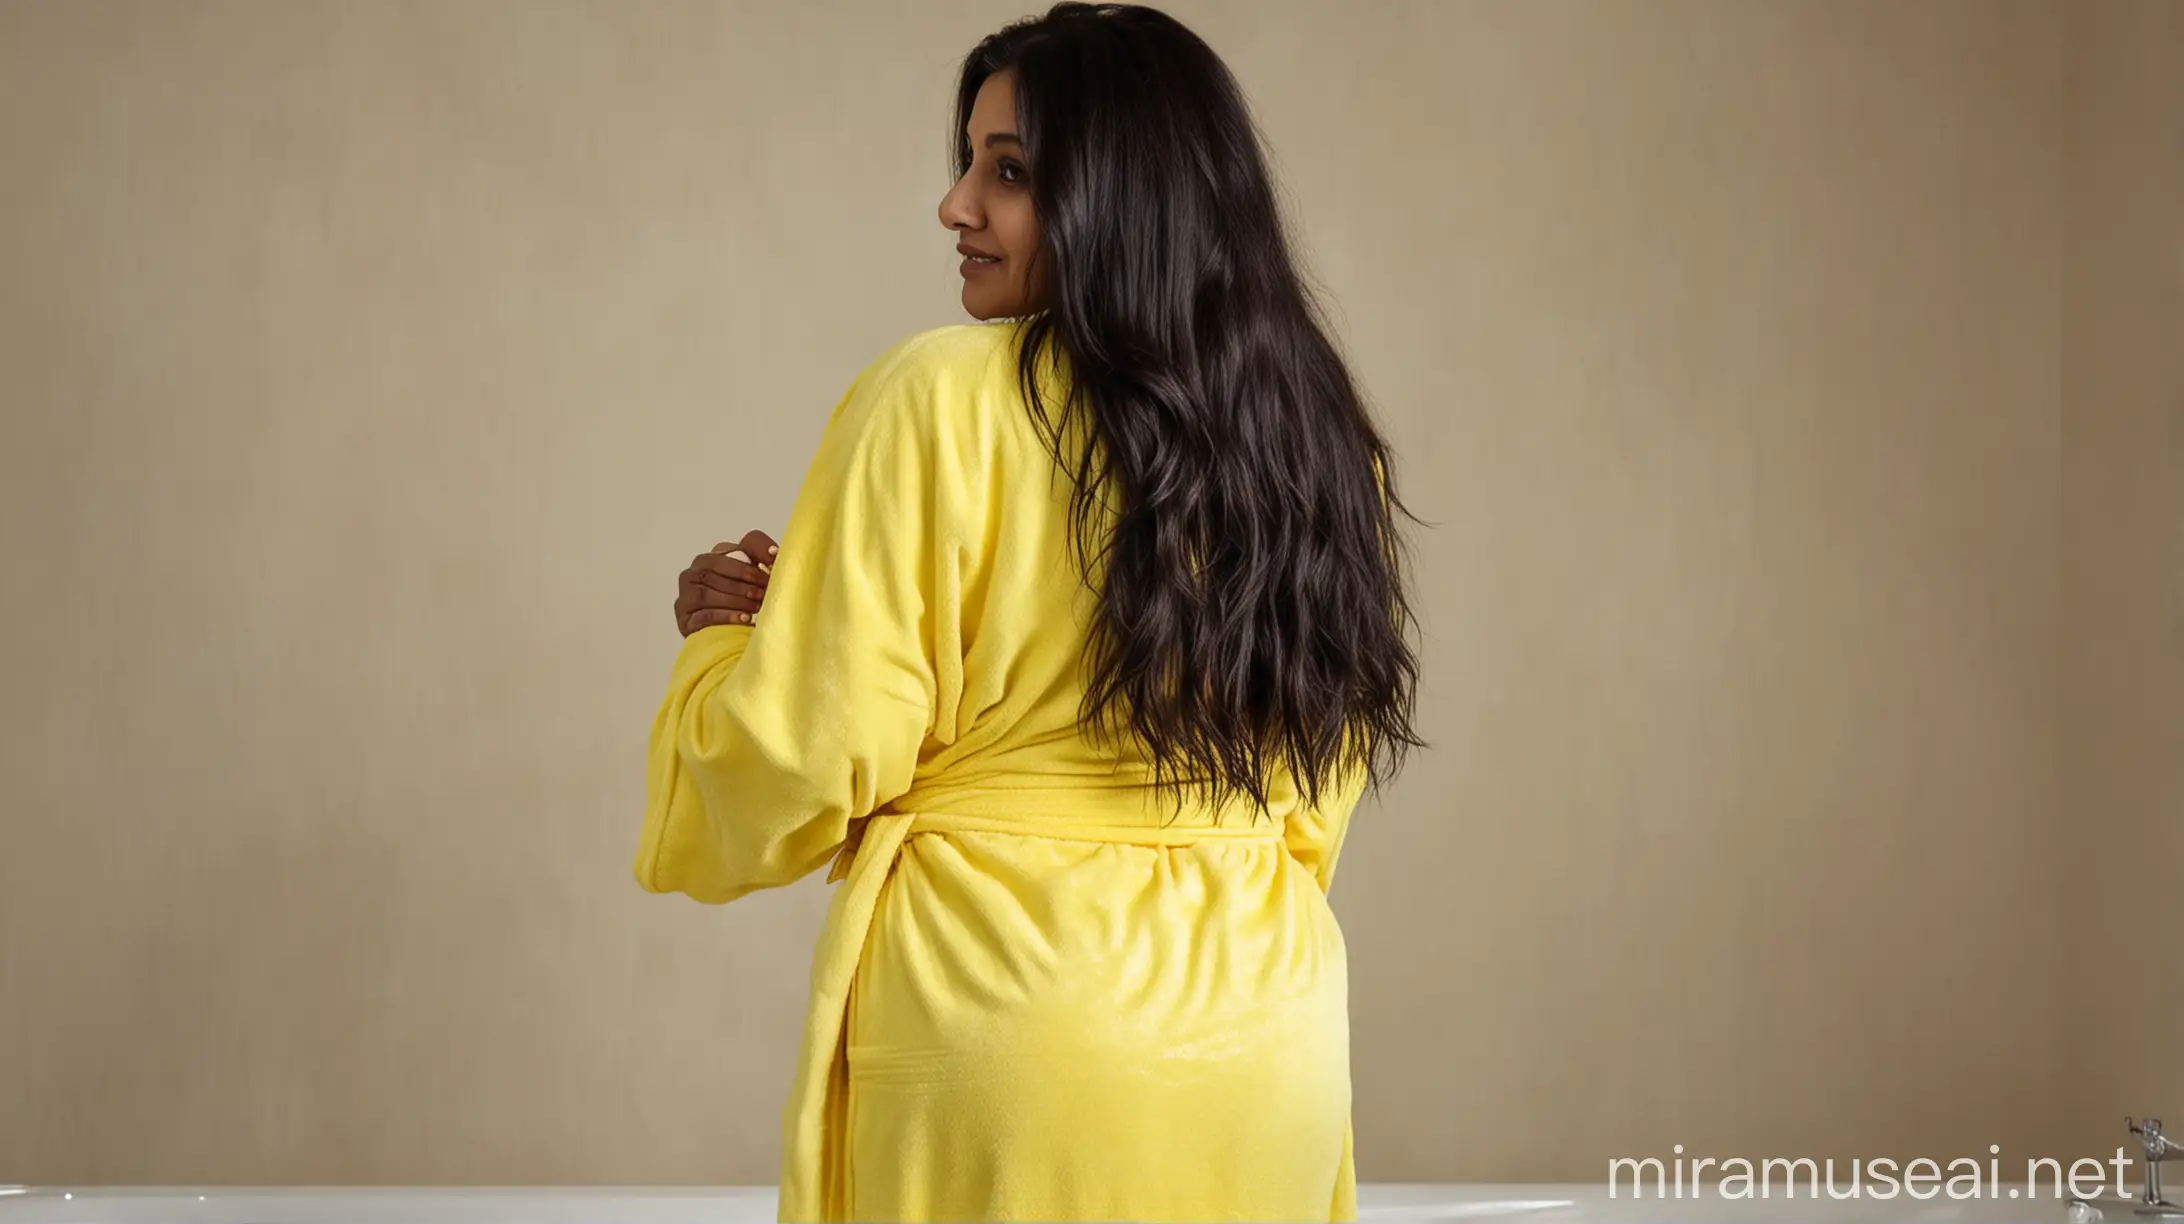 Mature Indian Woman in Neon Yellow Bathrobe with Long Hair